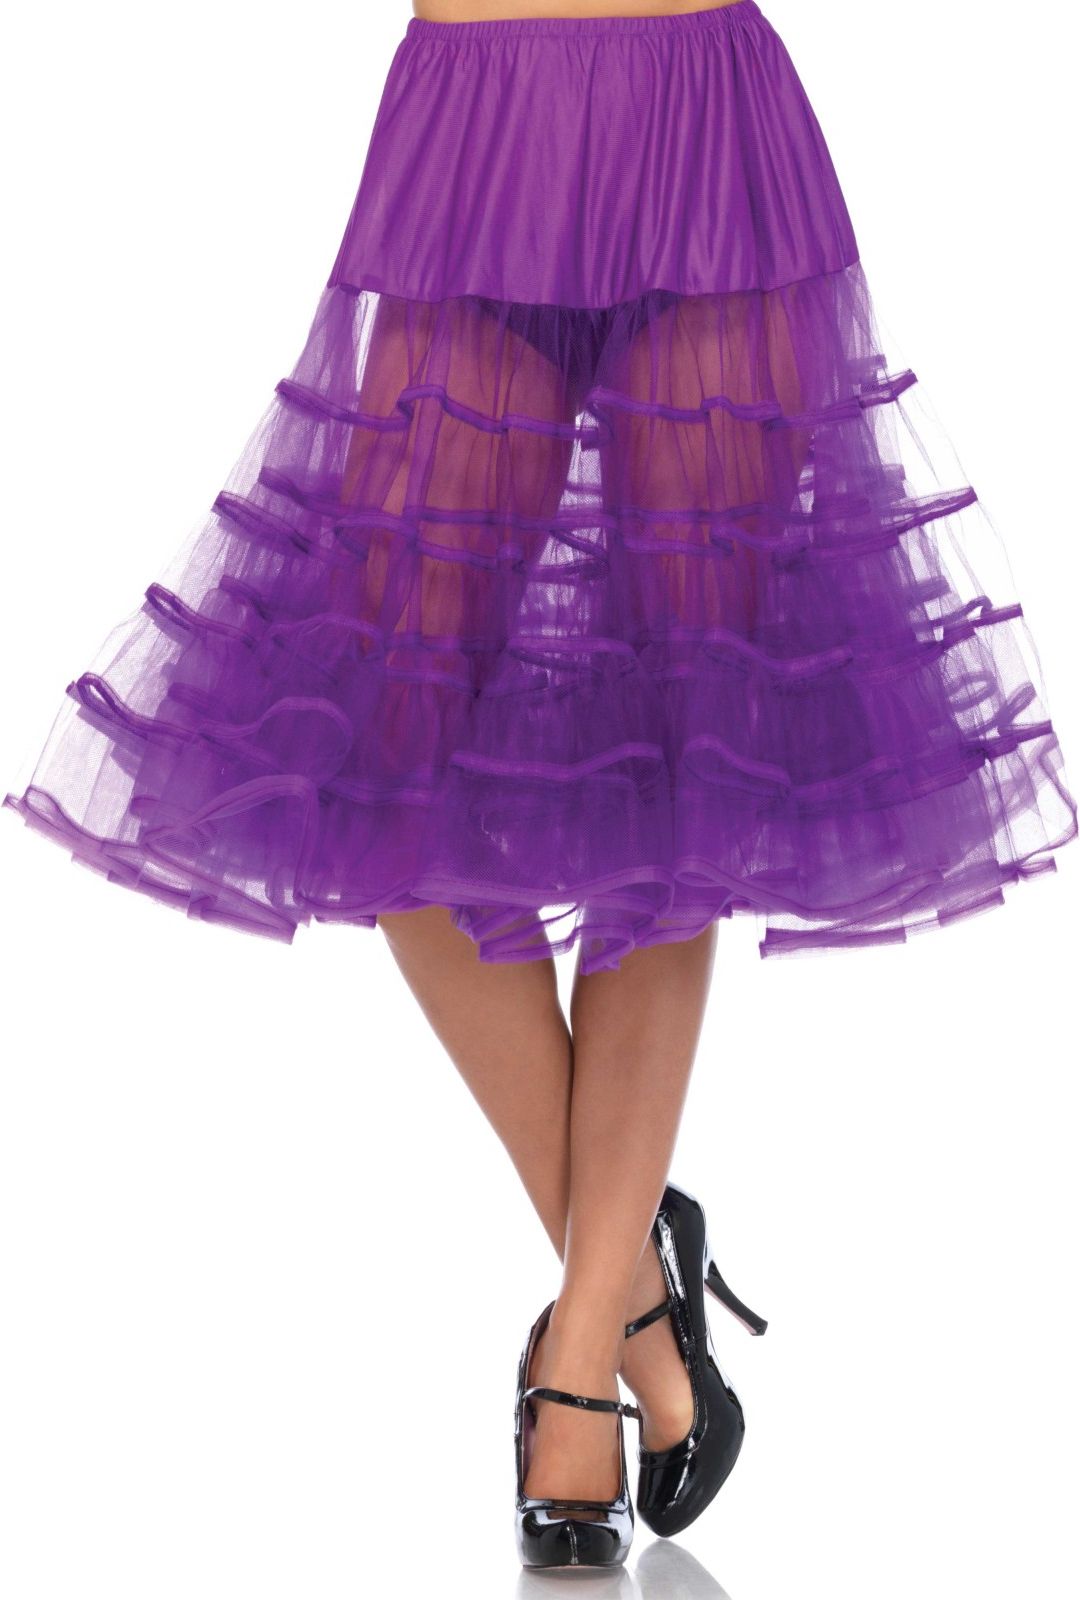 Luxe paarse petticoat